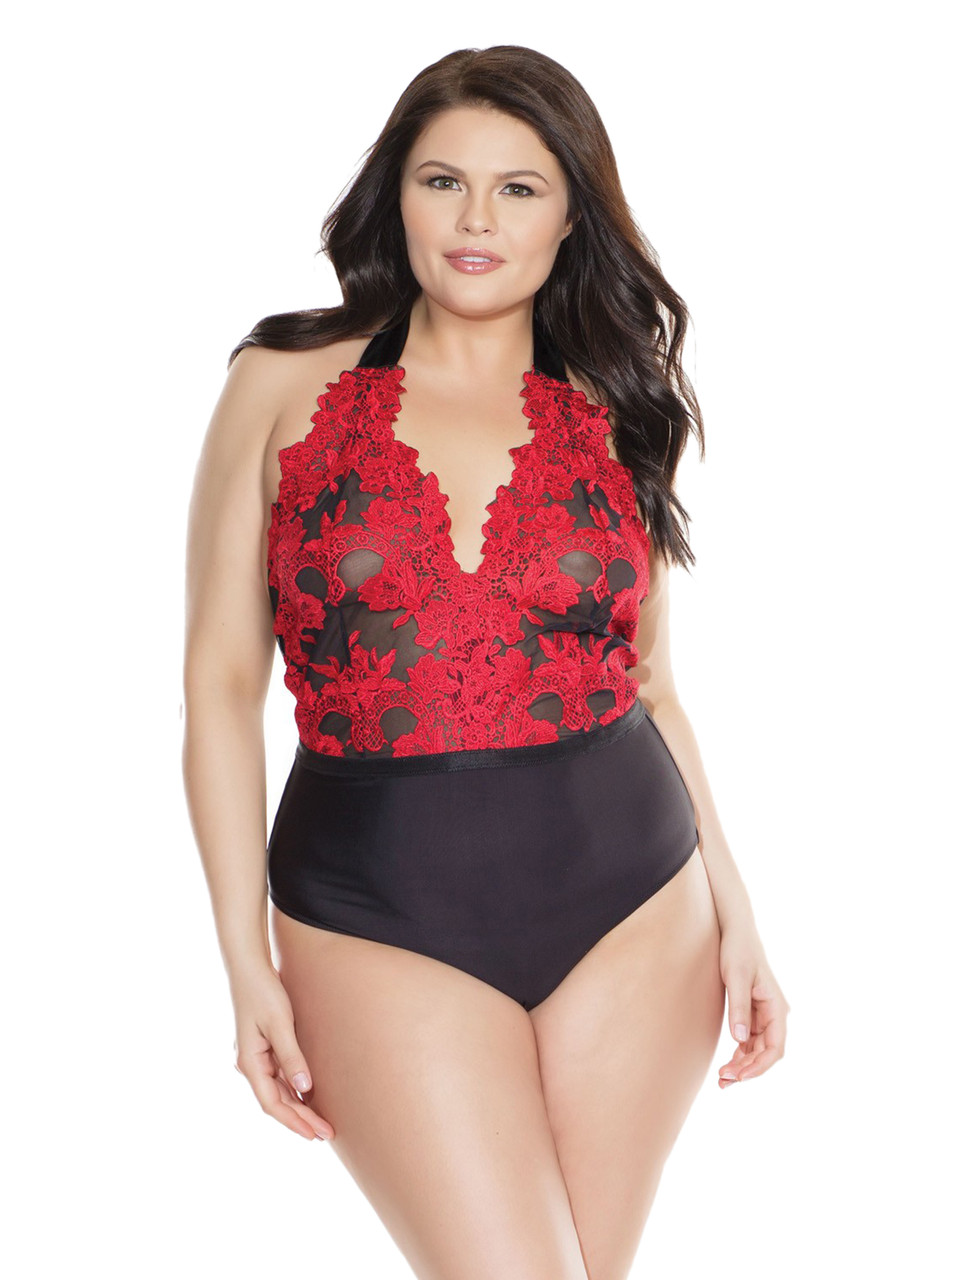 Womens Plus Size Embroidered Floral Sheer Teddy Bodysuit Lingerie